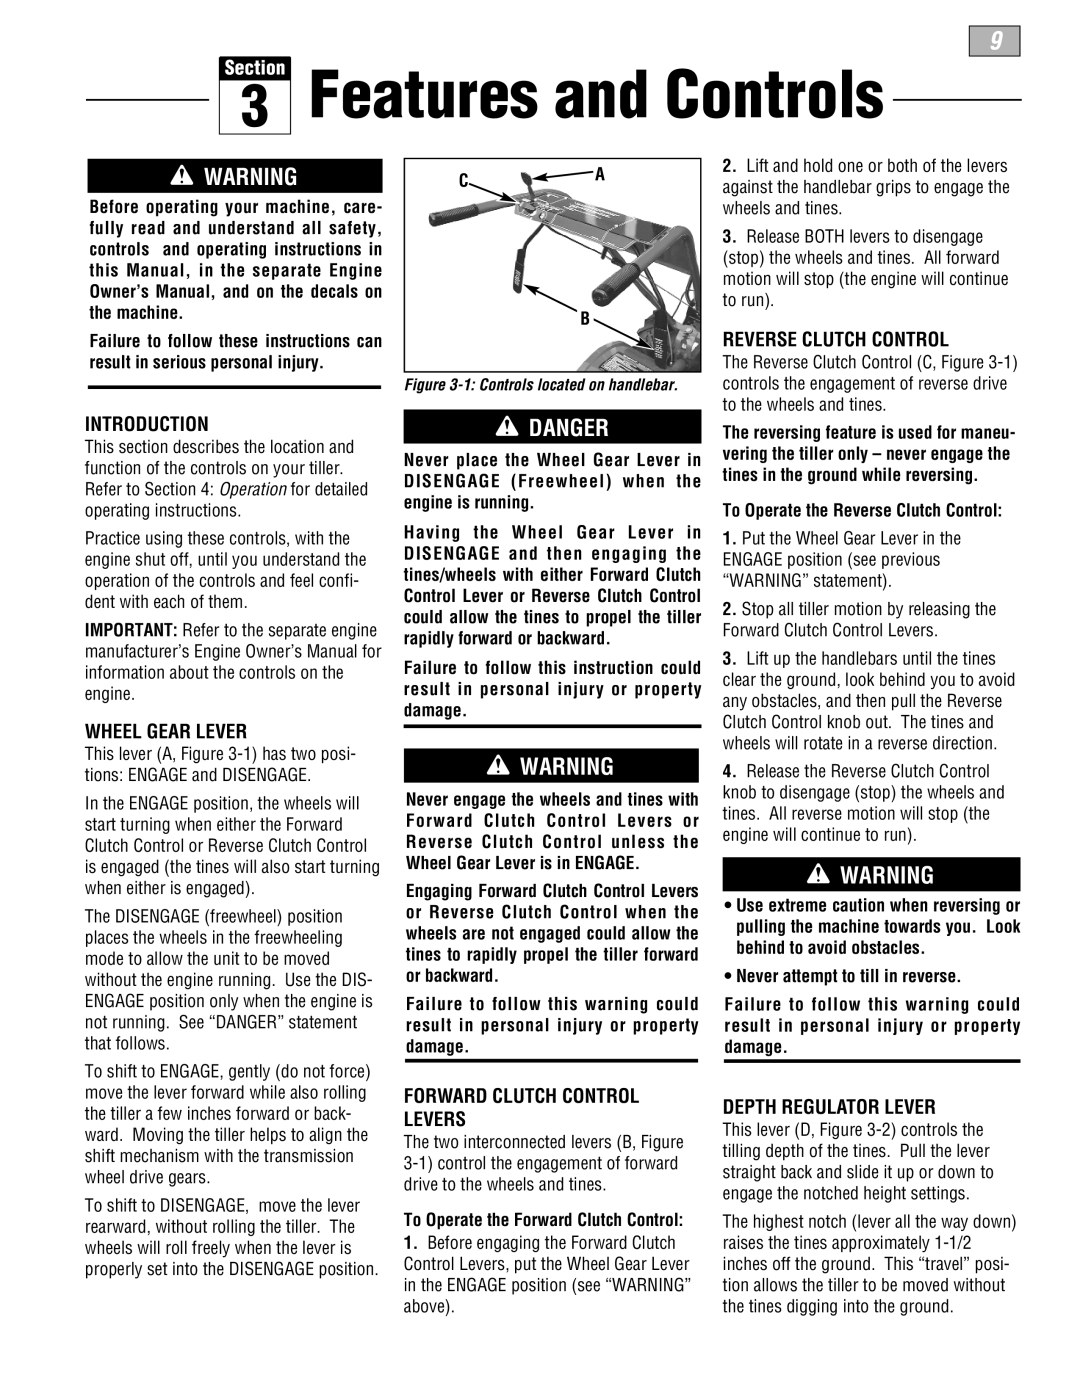 Troy-Bilt 665B manual Features and Controls, Danger, Introduction, Wheel Gear Lever, Reverse Clutch Control, C A B, Section 